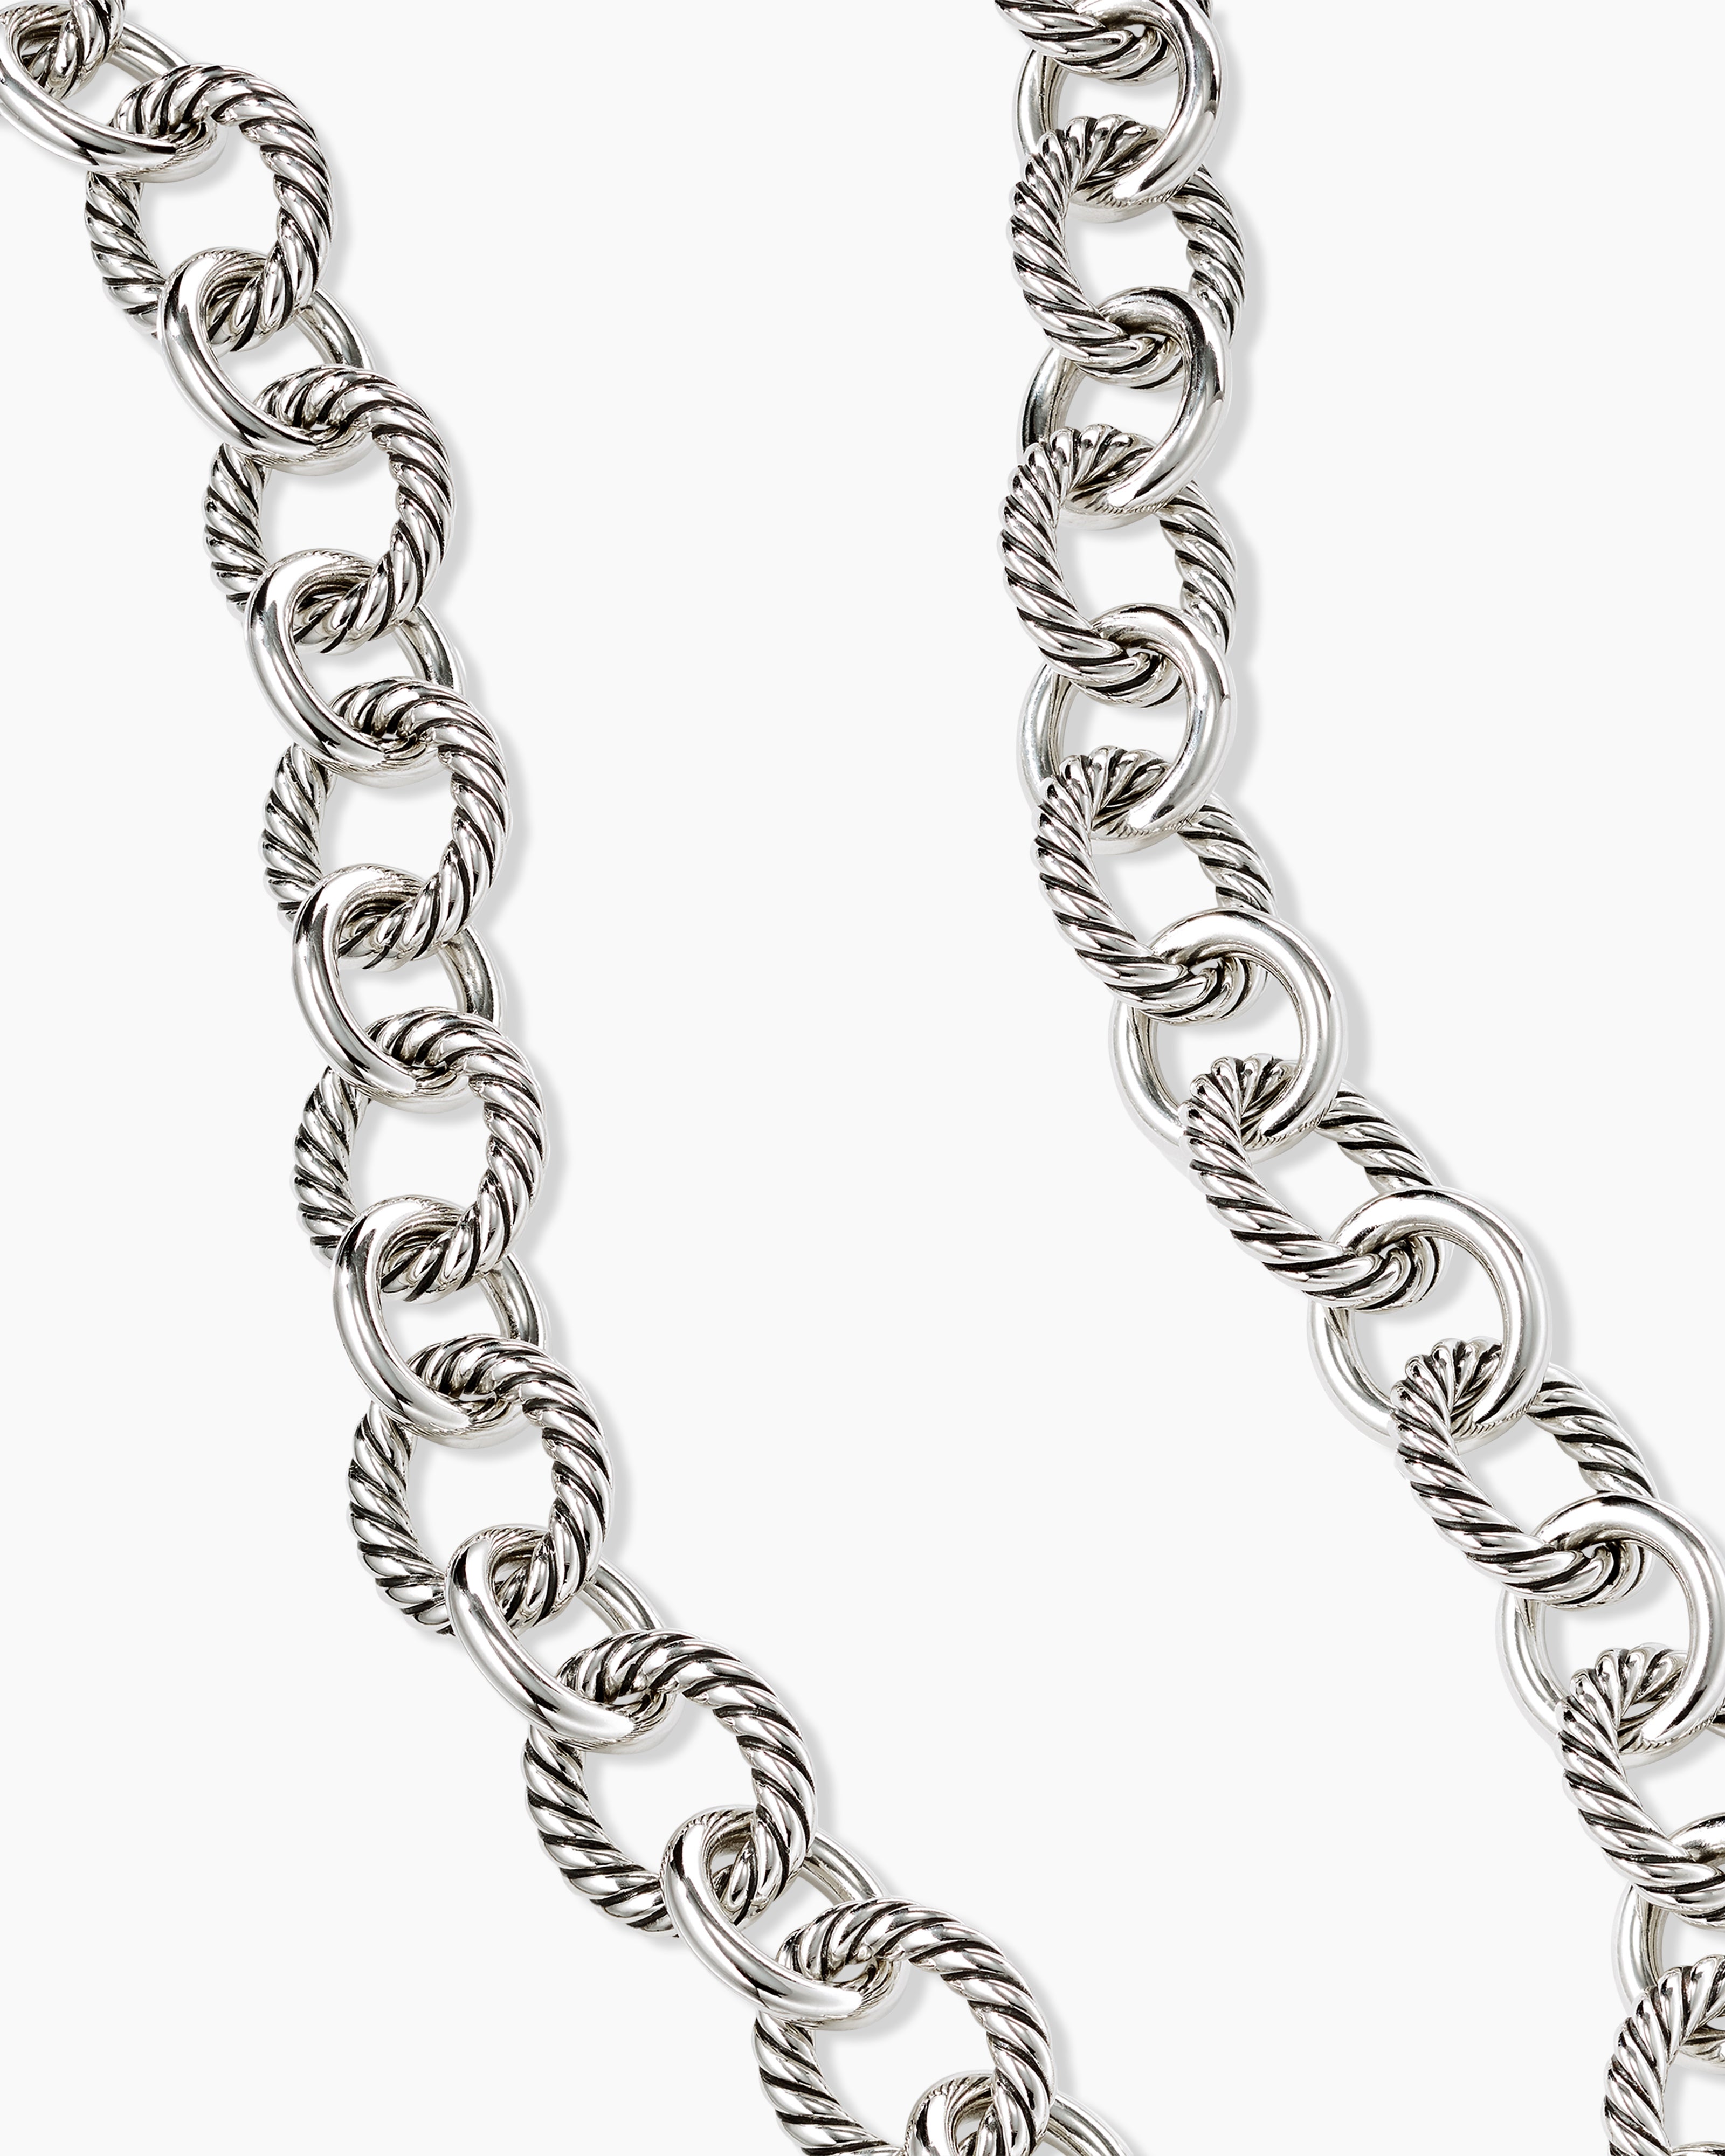 Large Textured Handmade Oval Silver Link Chain